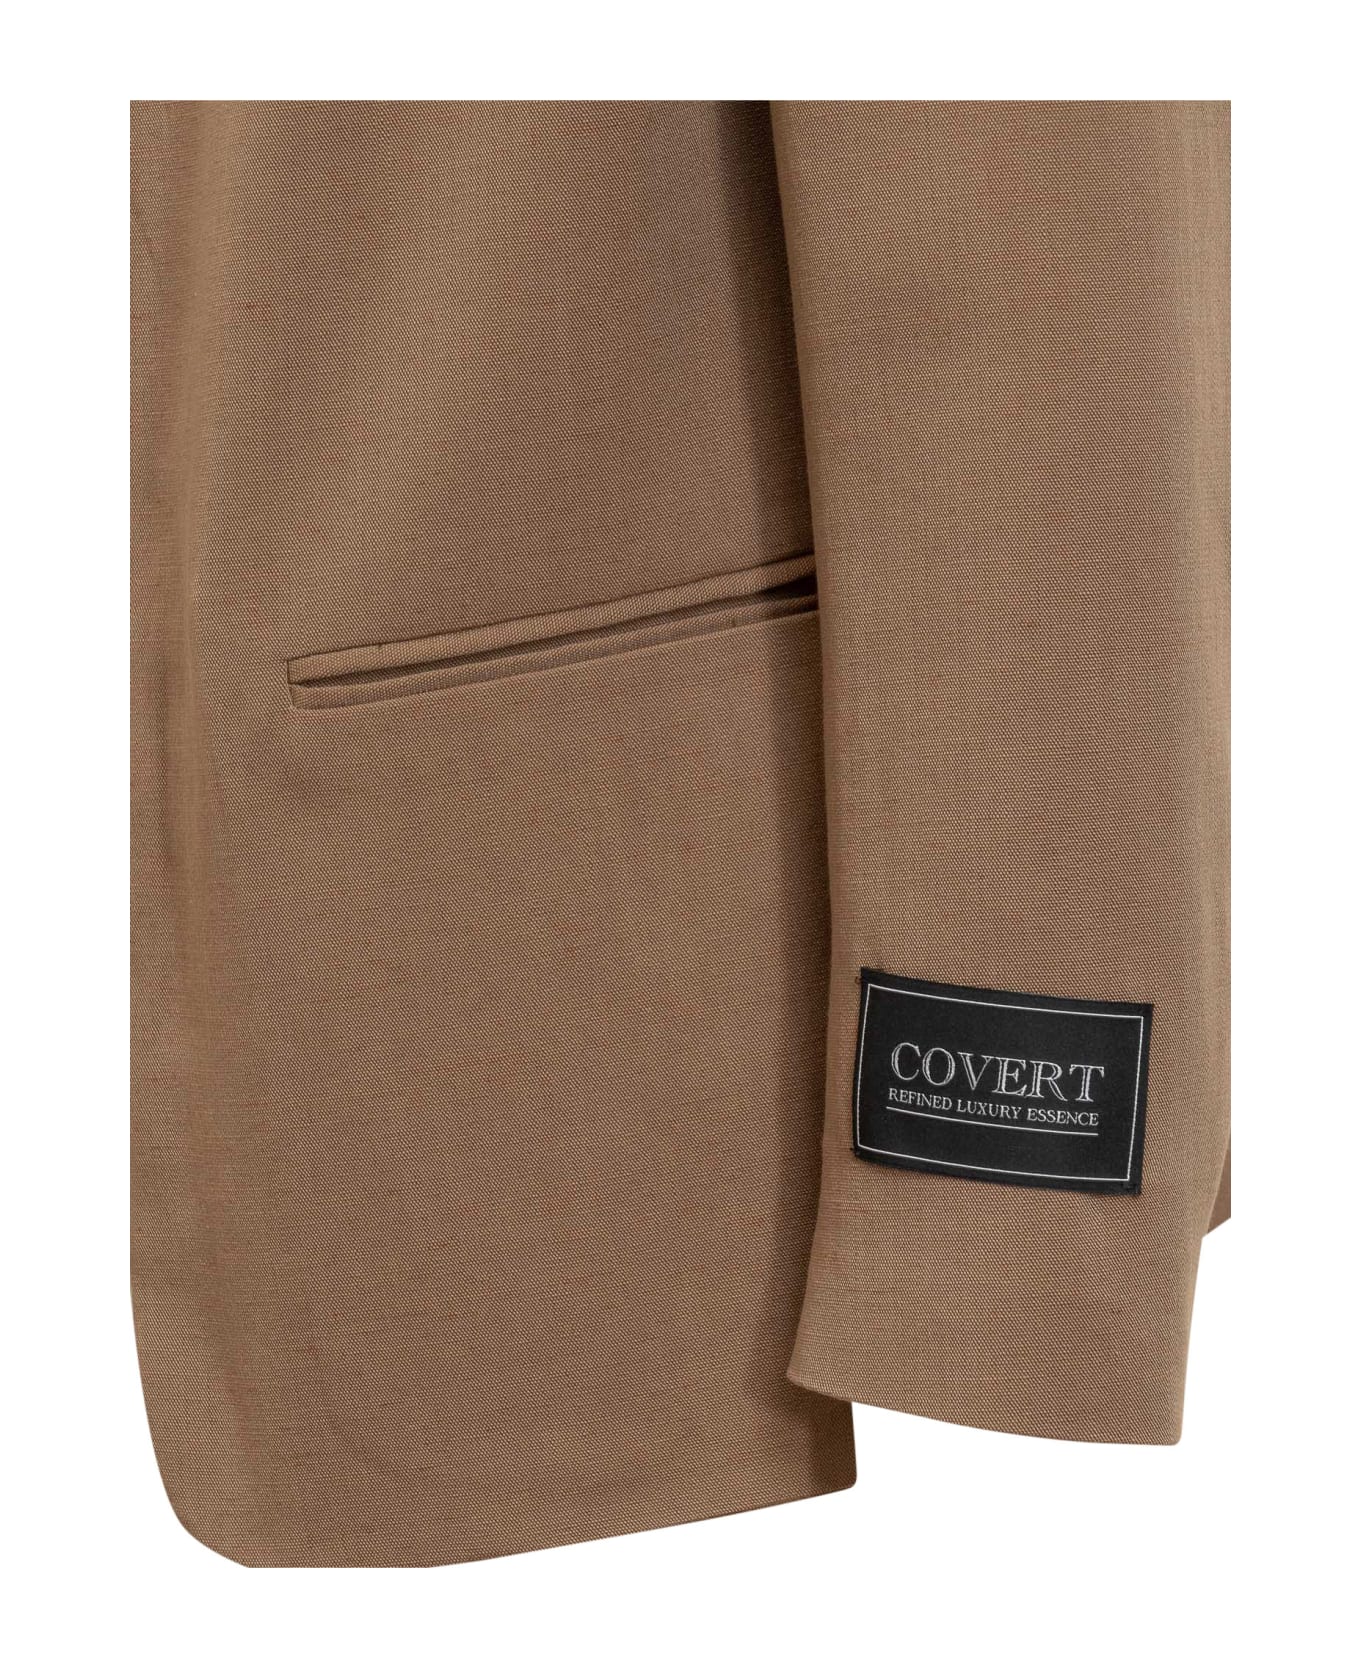 Covert Blazer Open At The Front - TAN